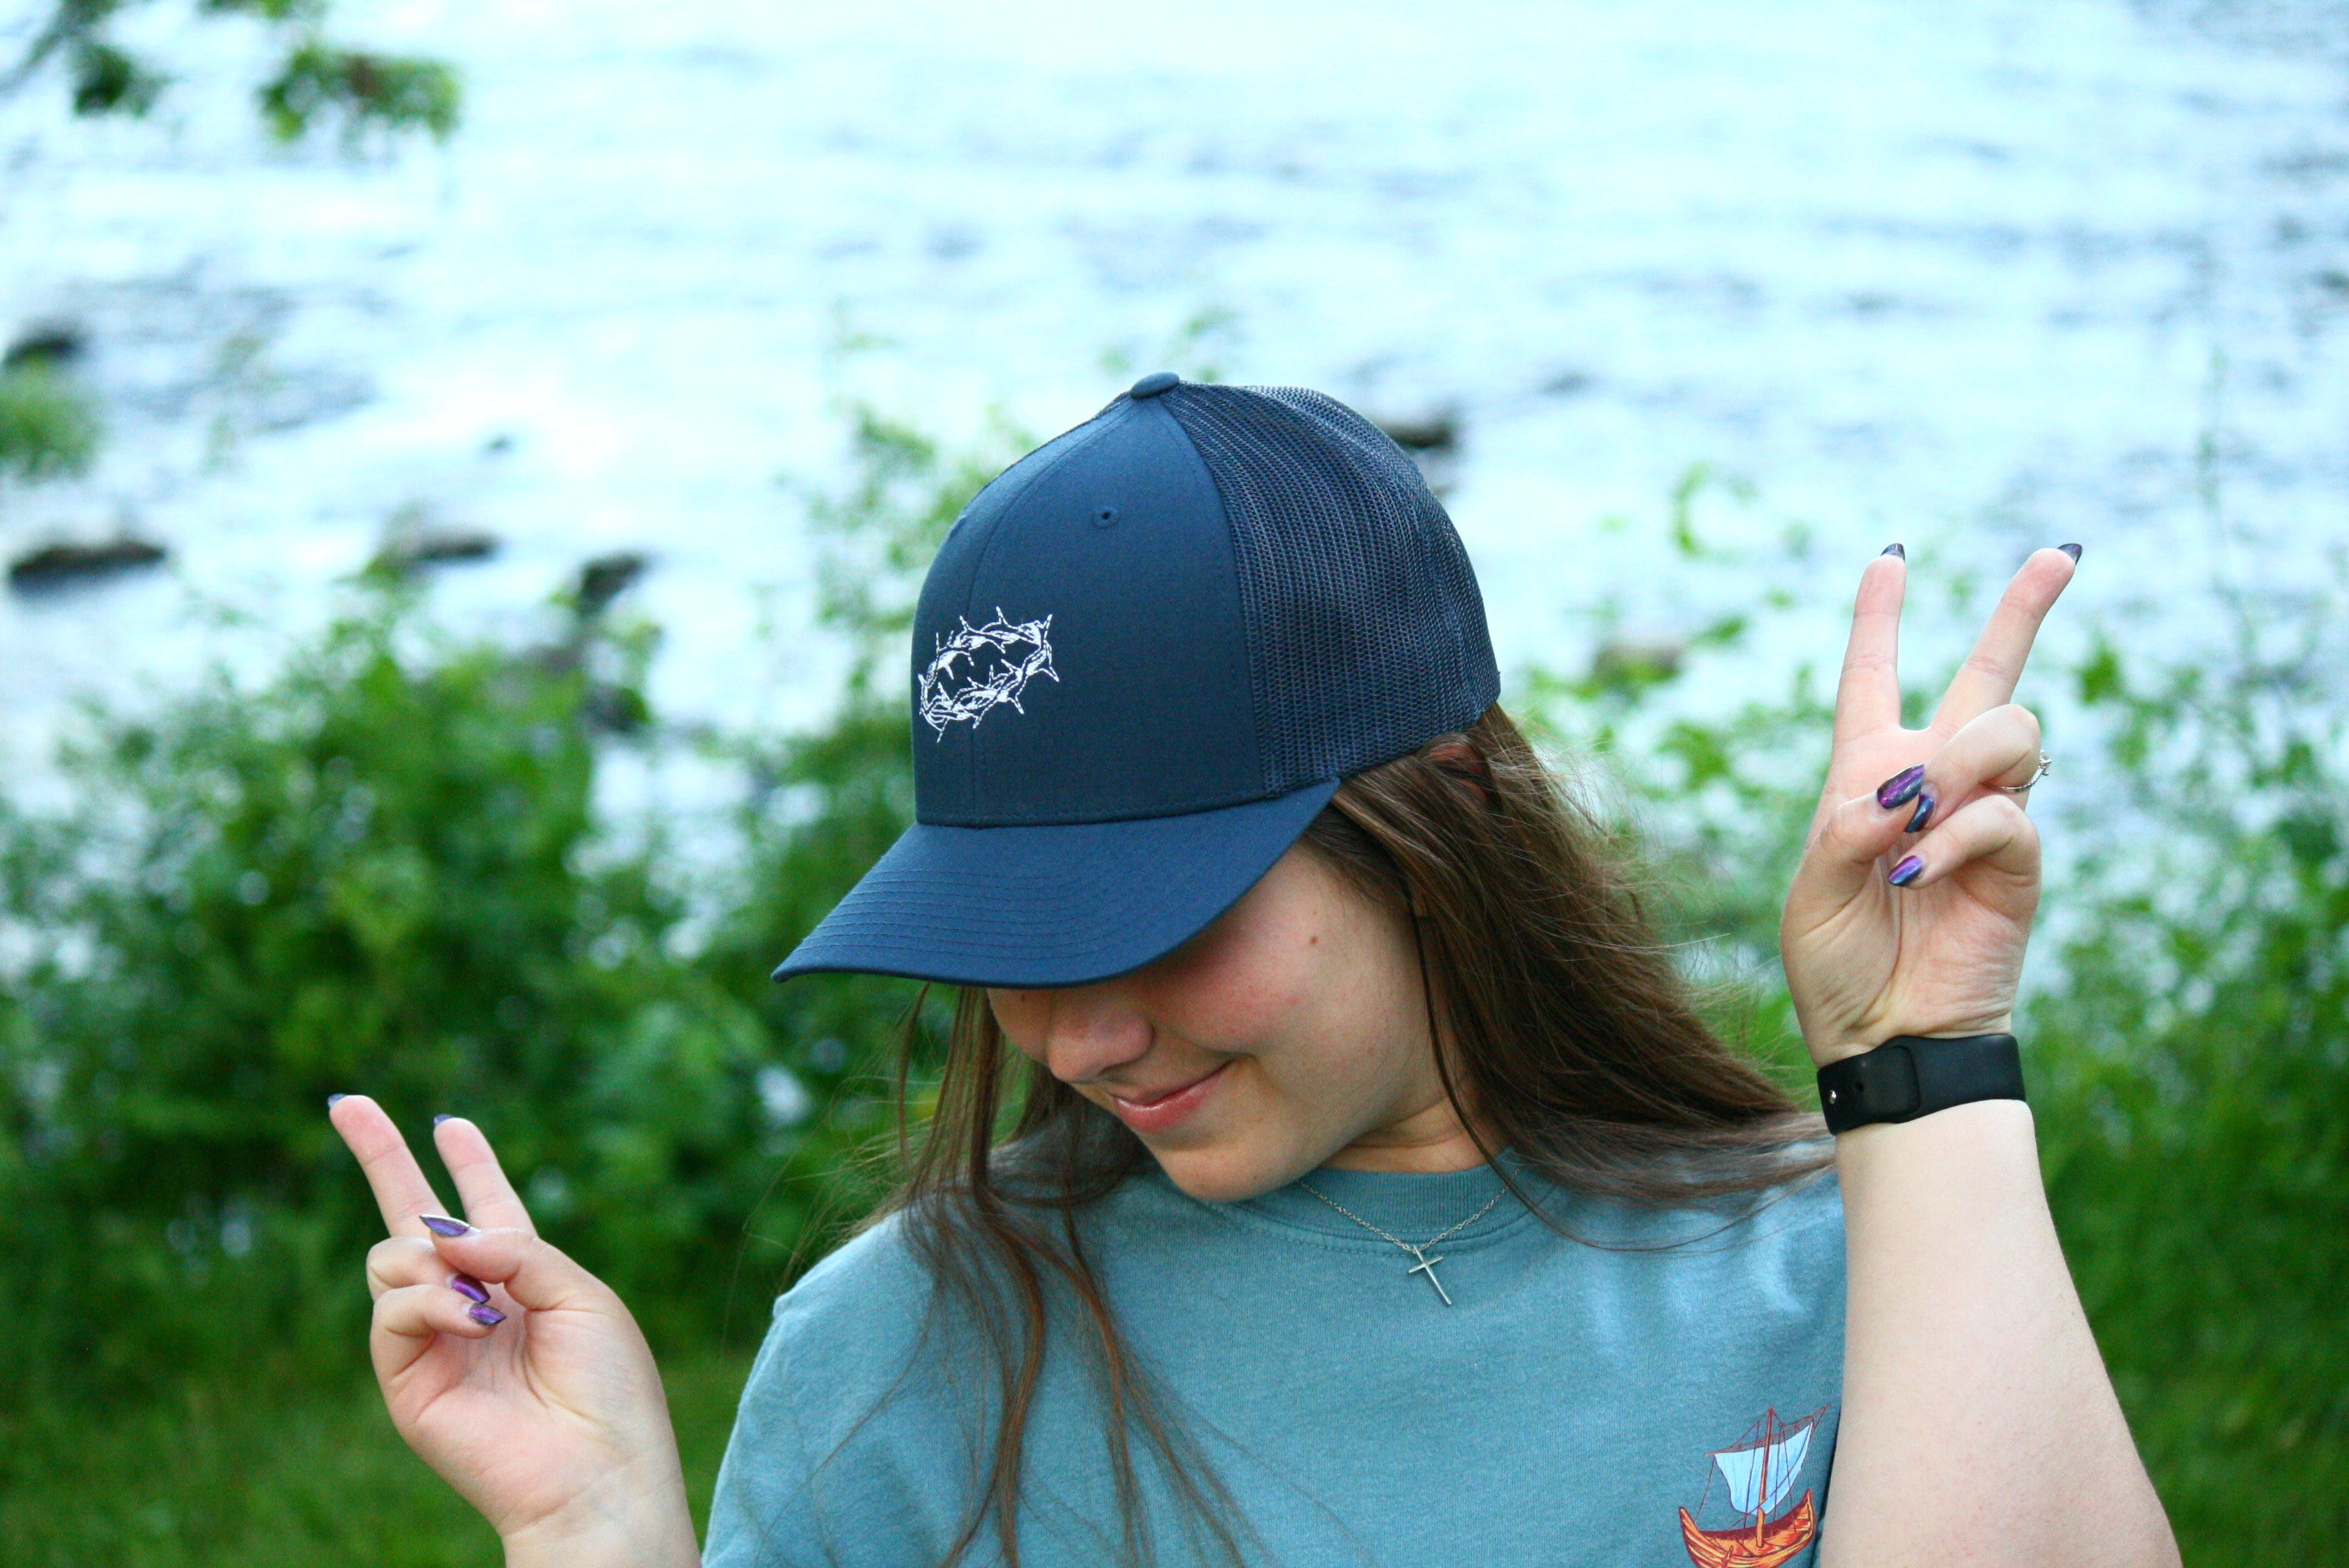 Girl wearing navy blue hat with hands making peace sign. Hat has a white crown of thorns embroidered on top. Surrounded by bushes.